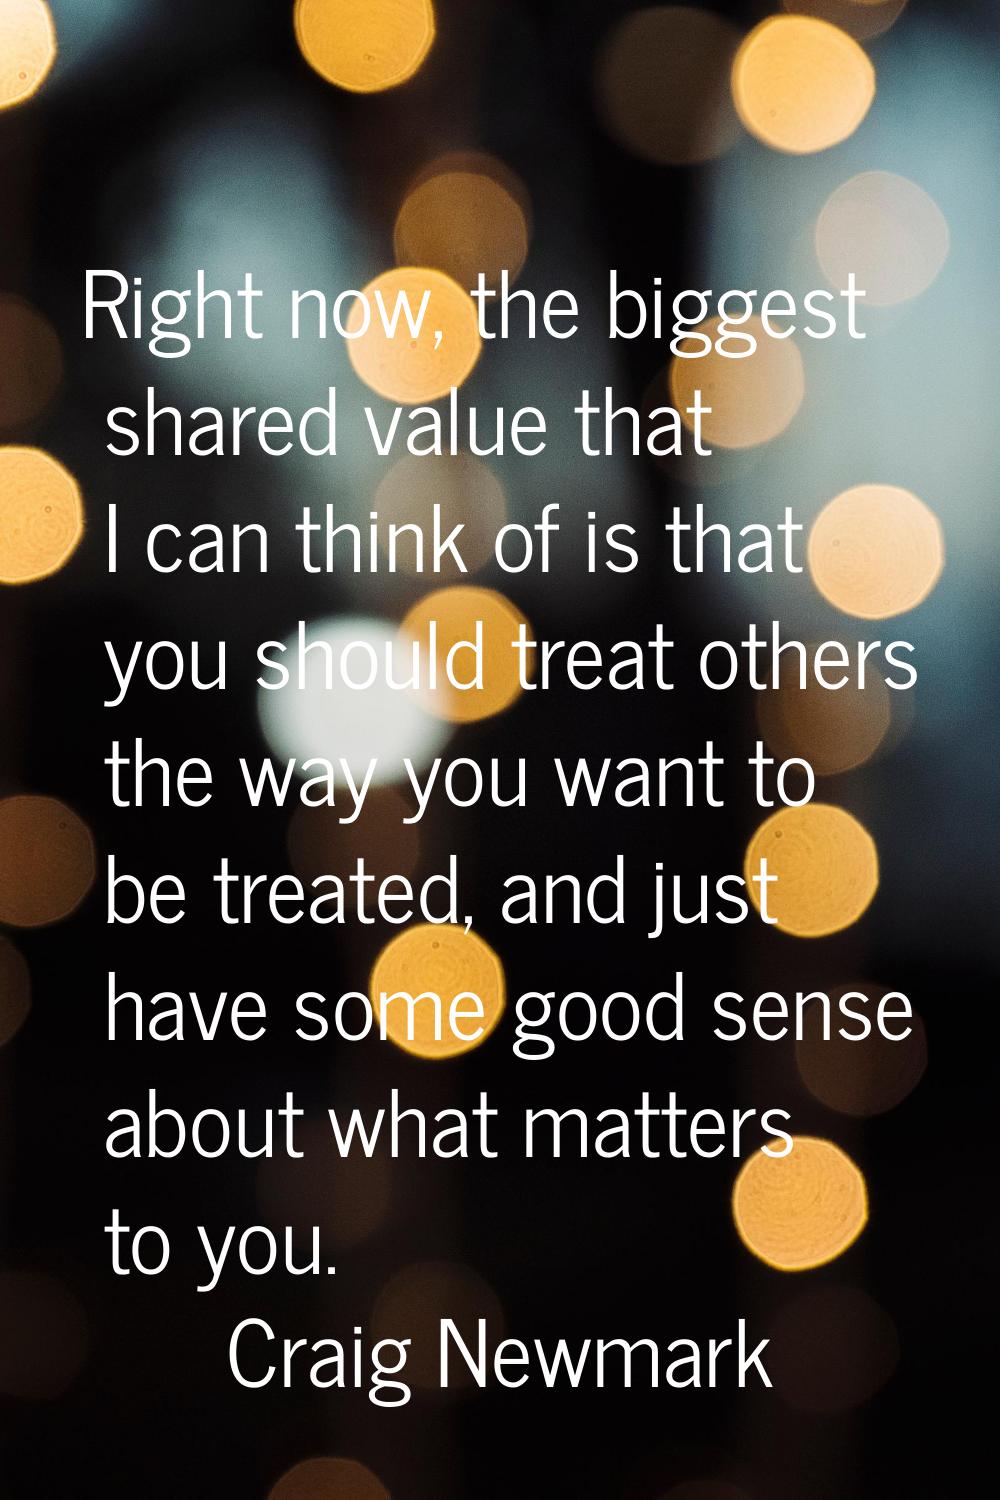 Right now, the biggest shared value that I can think of is that you should treat others the way you